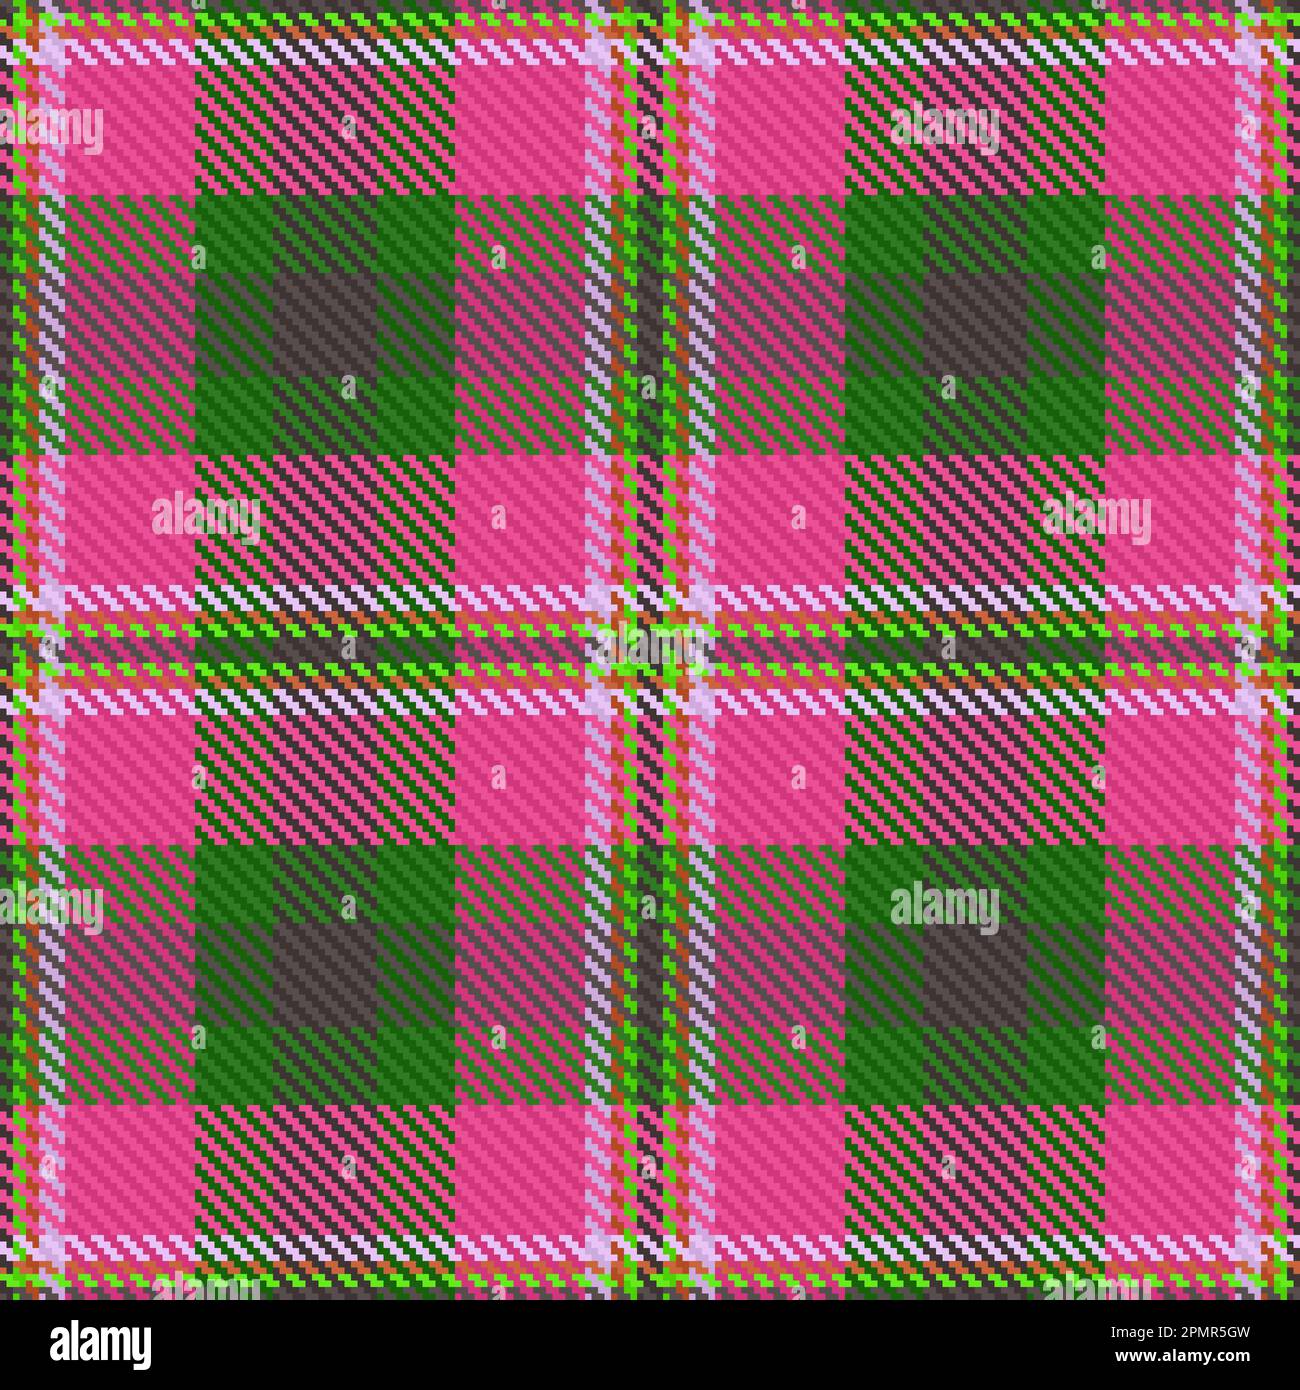 Plaid textile vector. Check pattern seamless. Tartan fabric background texture in green and red colors. Stock Vector